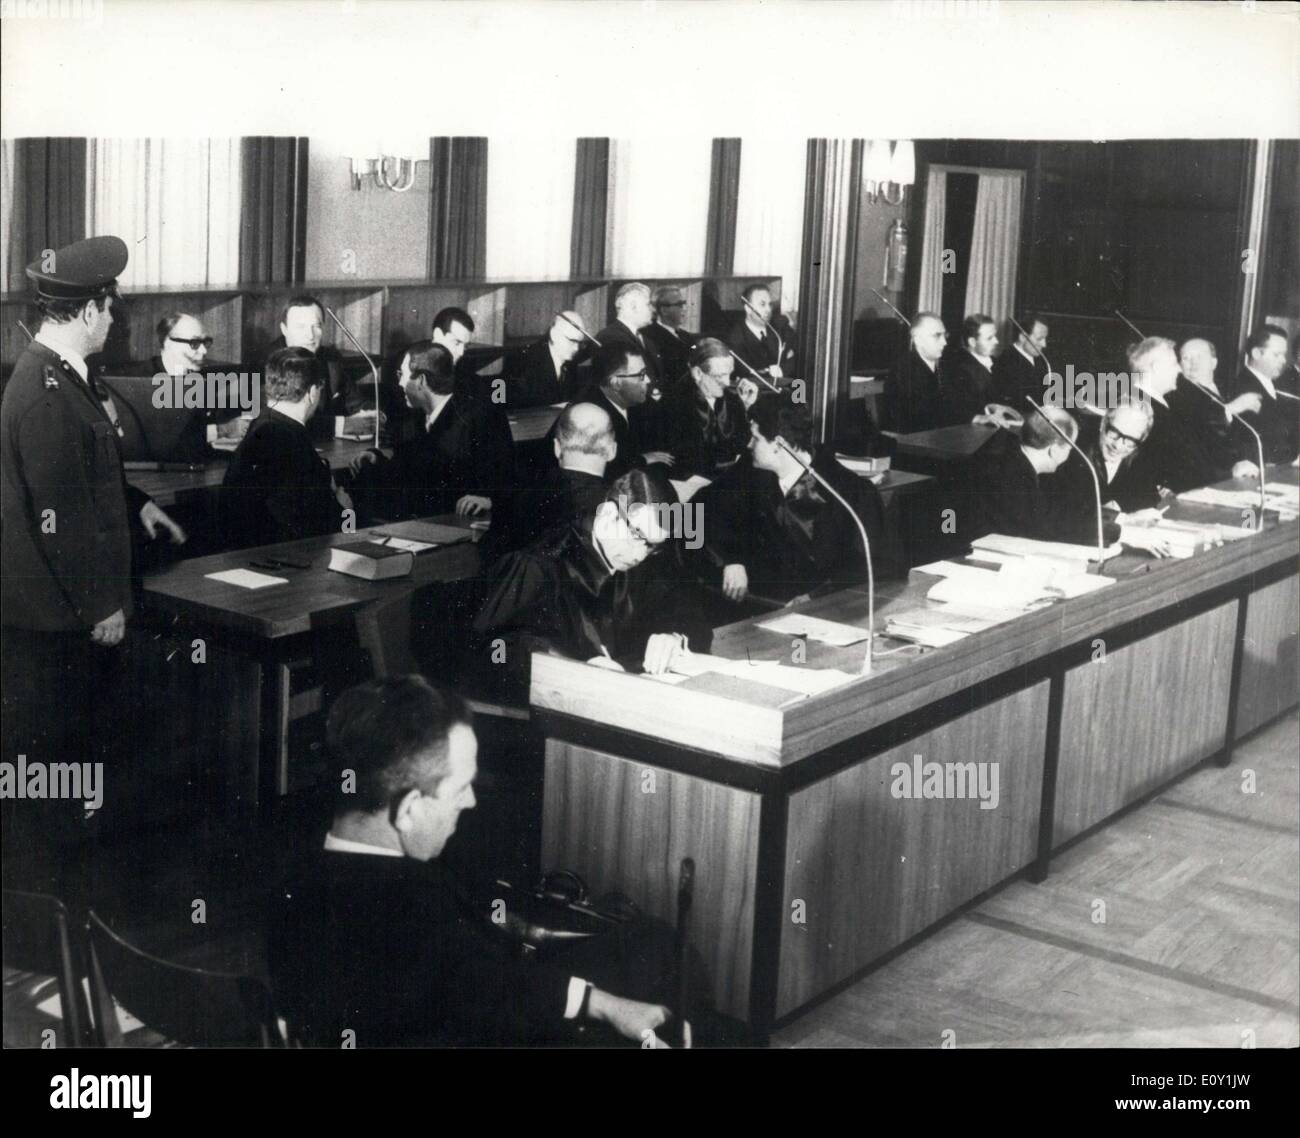 May 28, 1968 - GERMANY'S ''THALIDOMIDE TRIAL'' OPENS. The Germany's ''thalidomide trial'' began yesterday at Aledorf, near Aschen, and is expected to last two years. Seven senior executives of the Gruenenthal pharmaceutical firm, where the drug thalidomide was discovered and manufactured, face charges alleging that they caused bodily harm by means of the drug, brought about death by negligence and contravened the drug regulations. Nine men were to have been in the dock, but two were too ill to attend Stock Photo